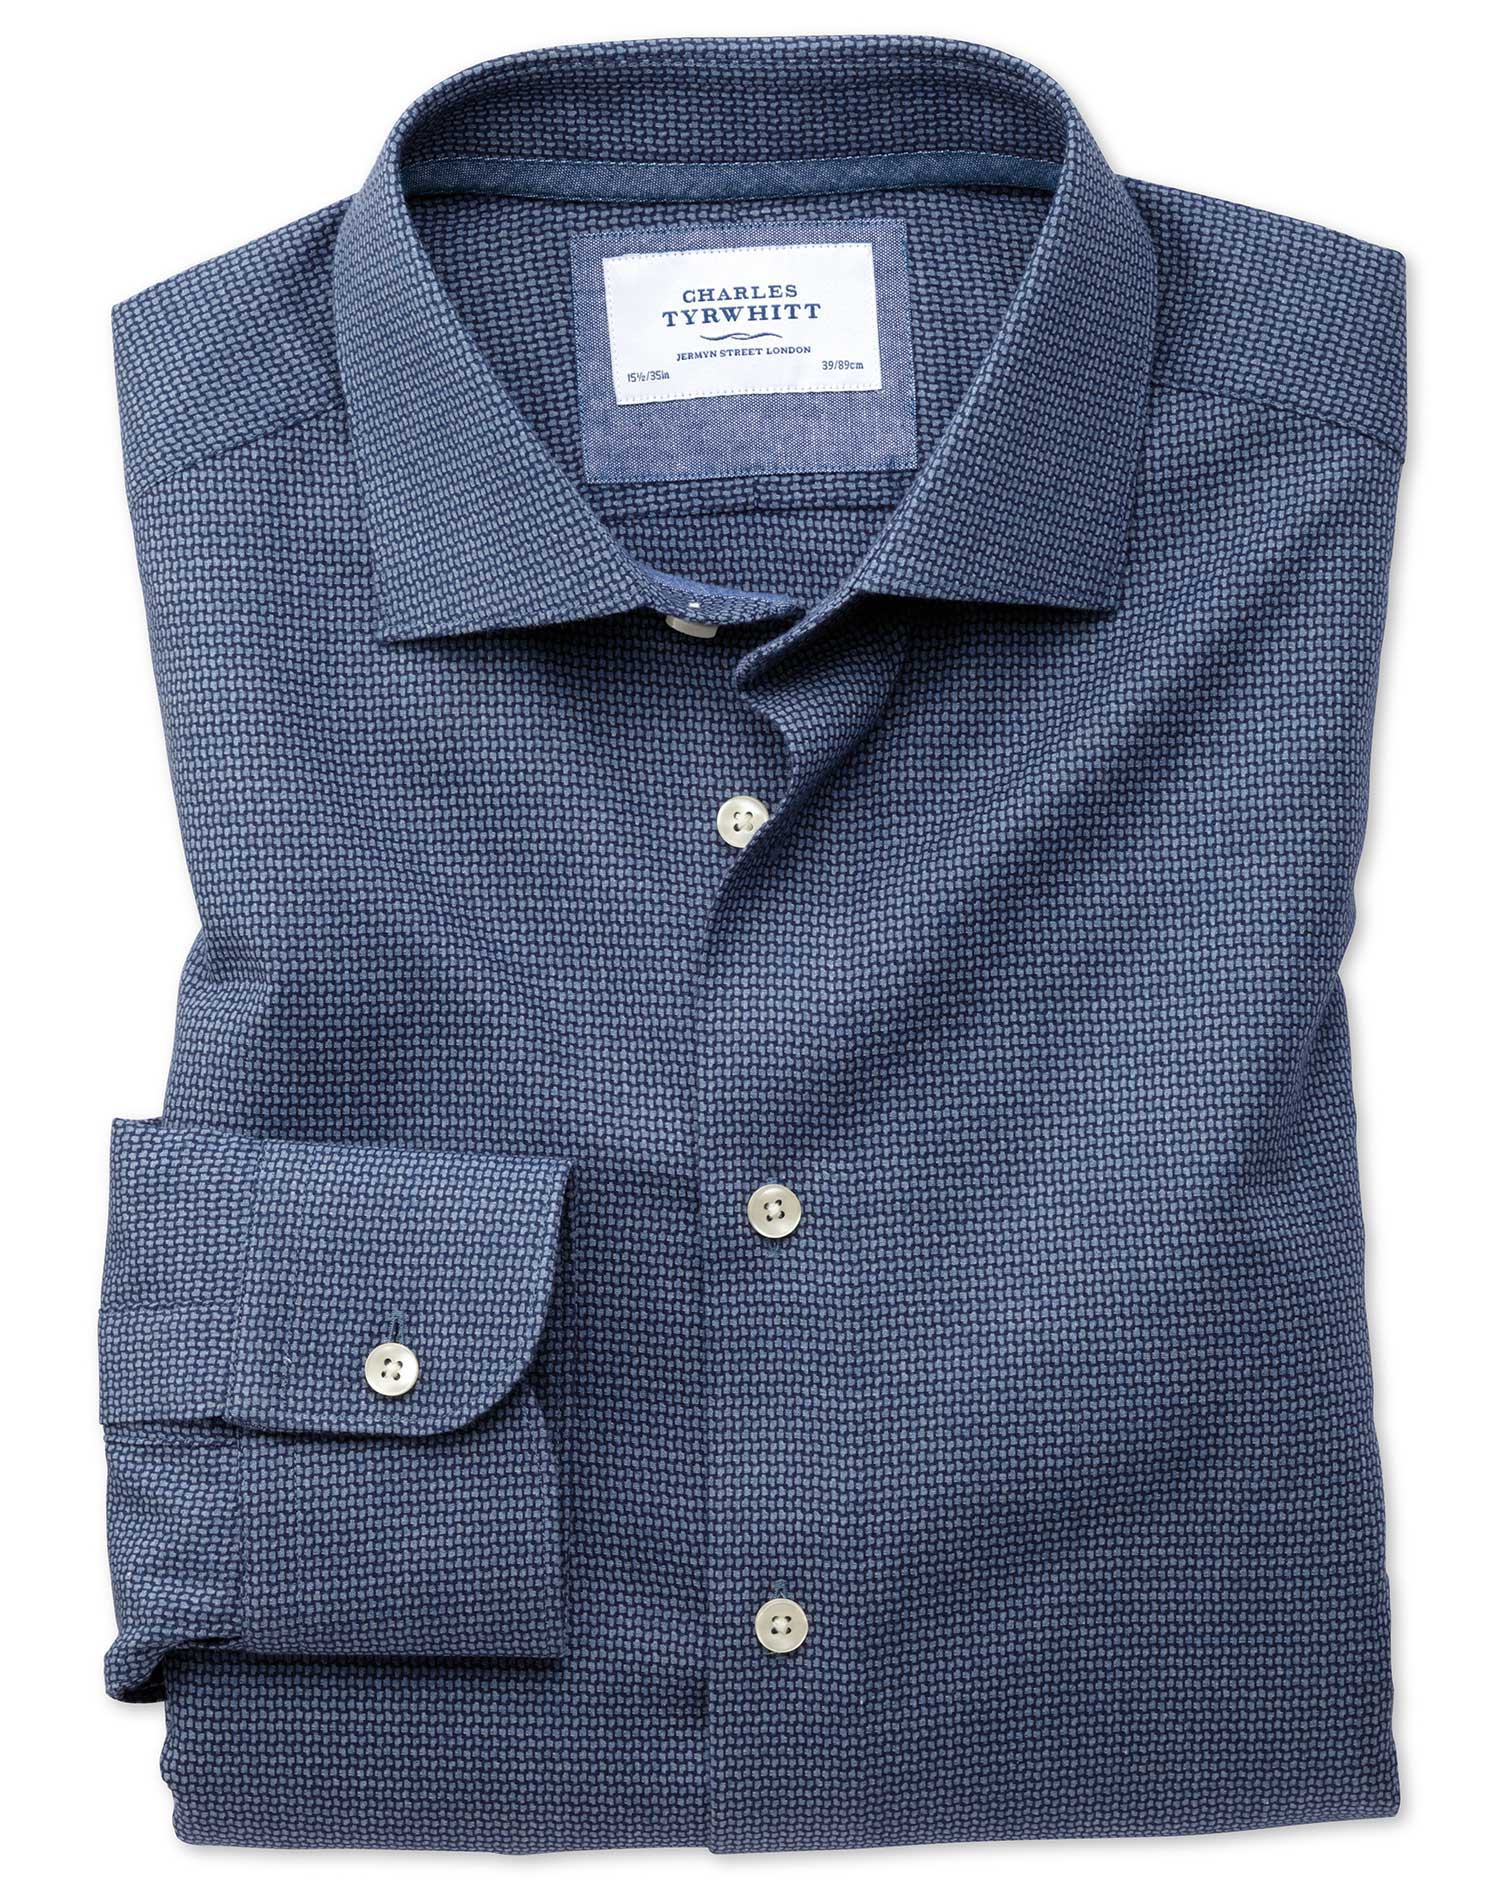 business casual patterned shirt